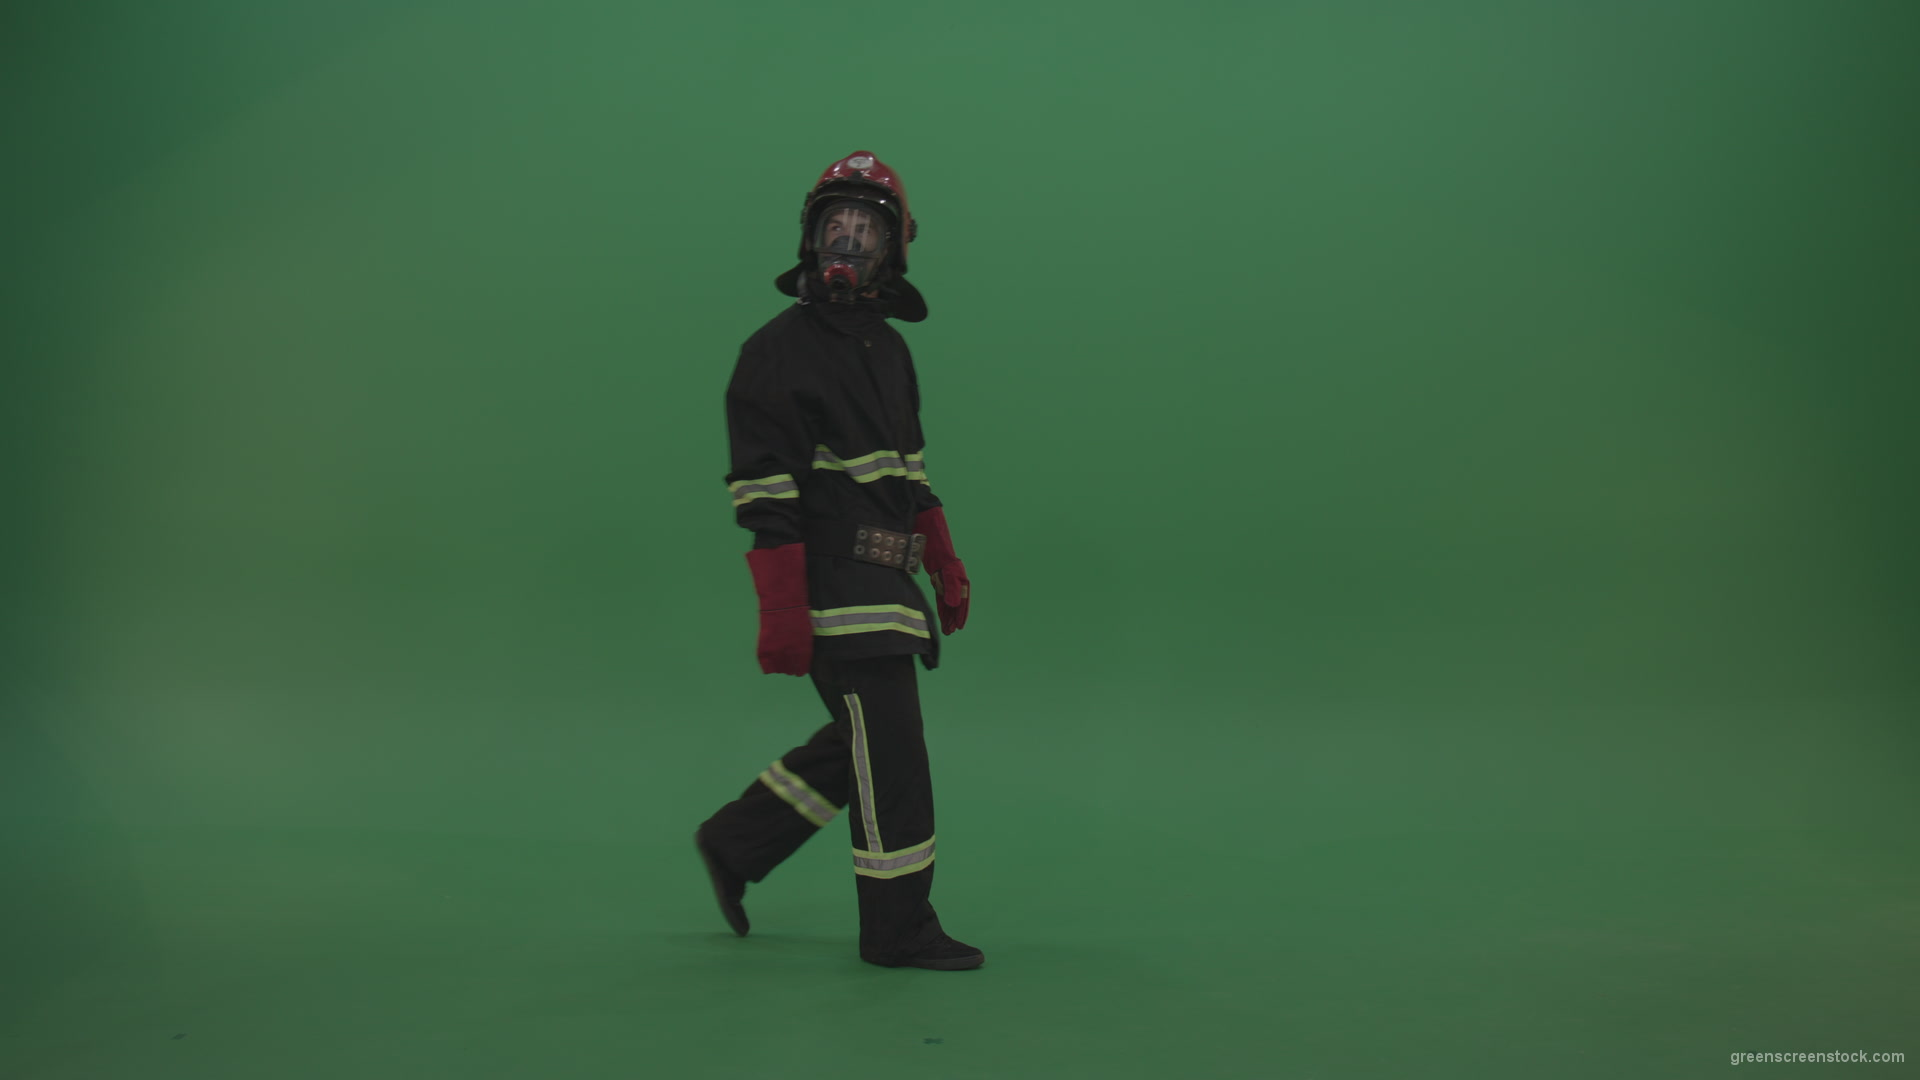 Young_Tough_Firefighter_Wearing_Fireman_Working_Kit_Costume_Walks_From_One_Side_To_Another_On_Green_Screen_Chroma_Key_Wall_Background_006 Green Screen Stock